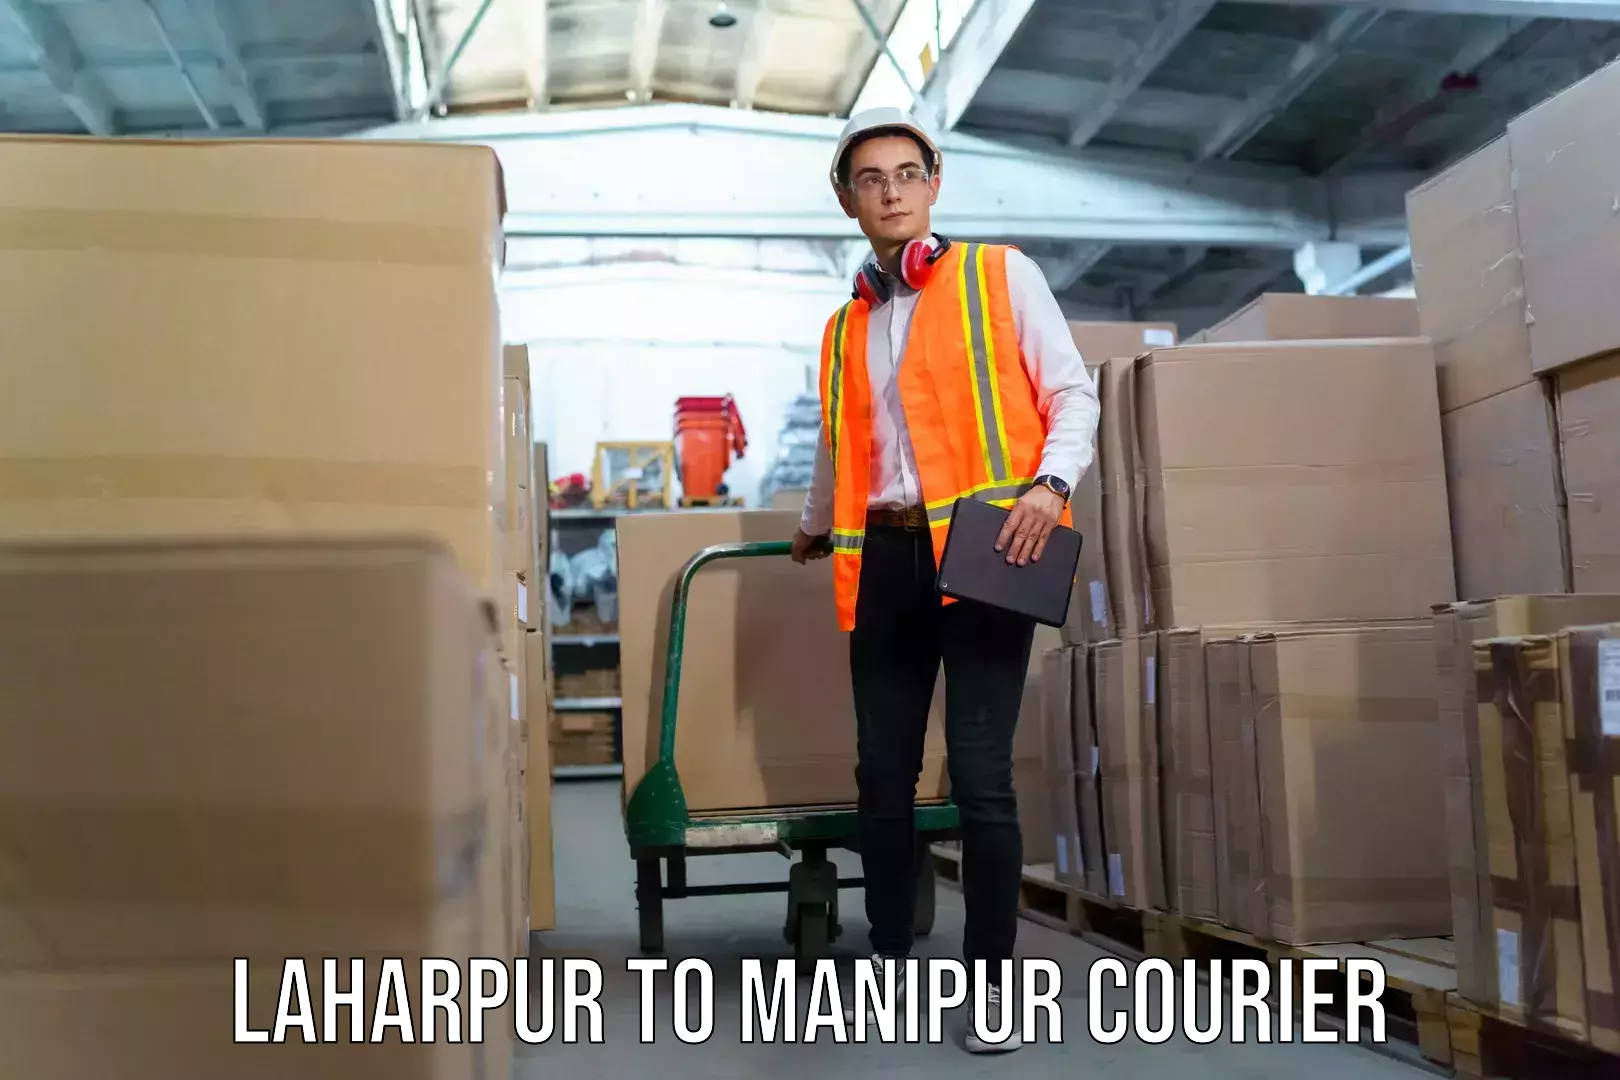 Luggage shipment specialists Laharpur to Manipur